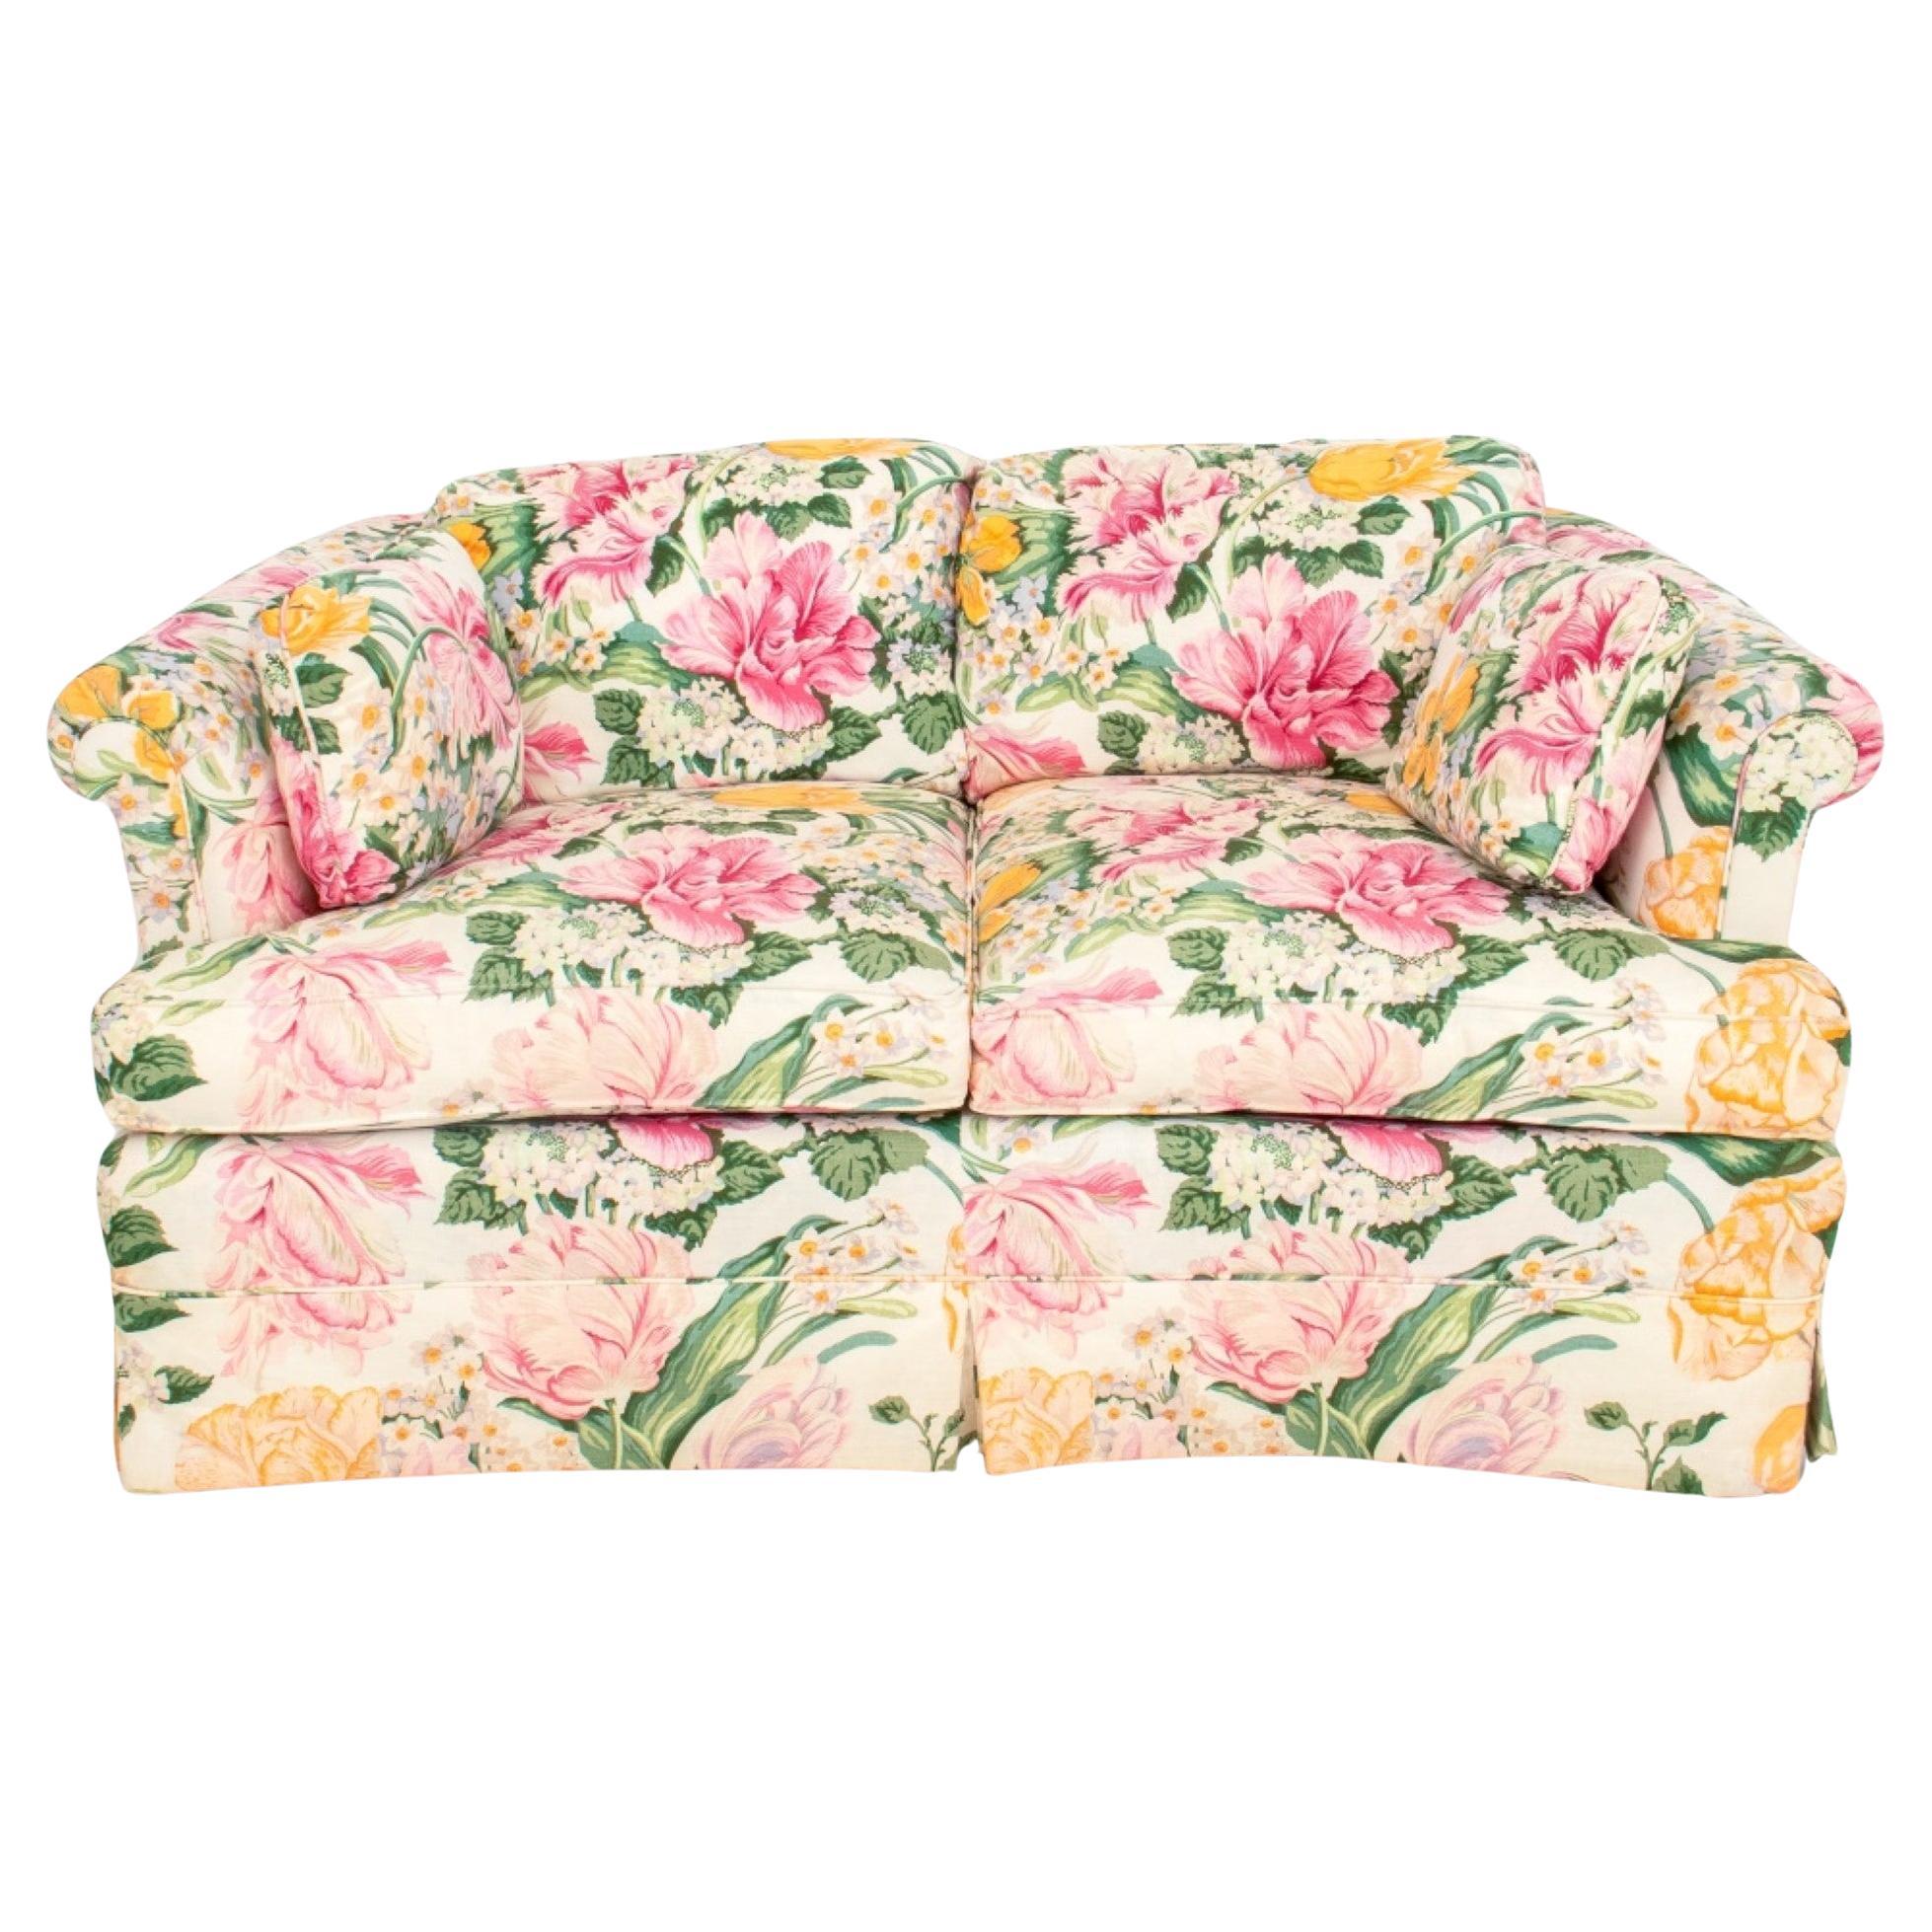 Floral Chintz Slipcovered Upholstered Sofa For Sale